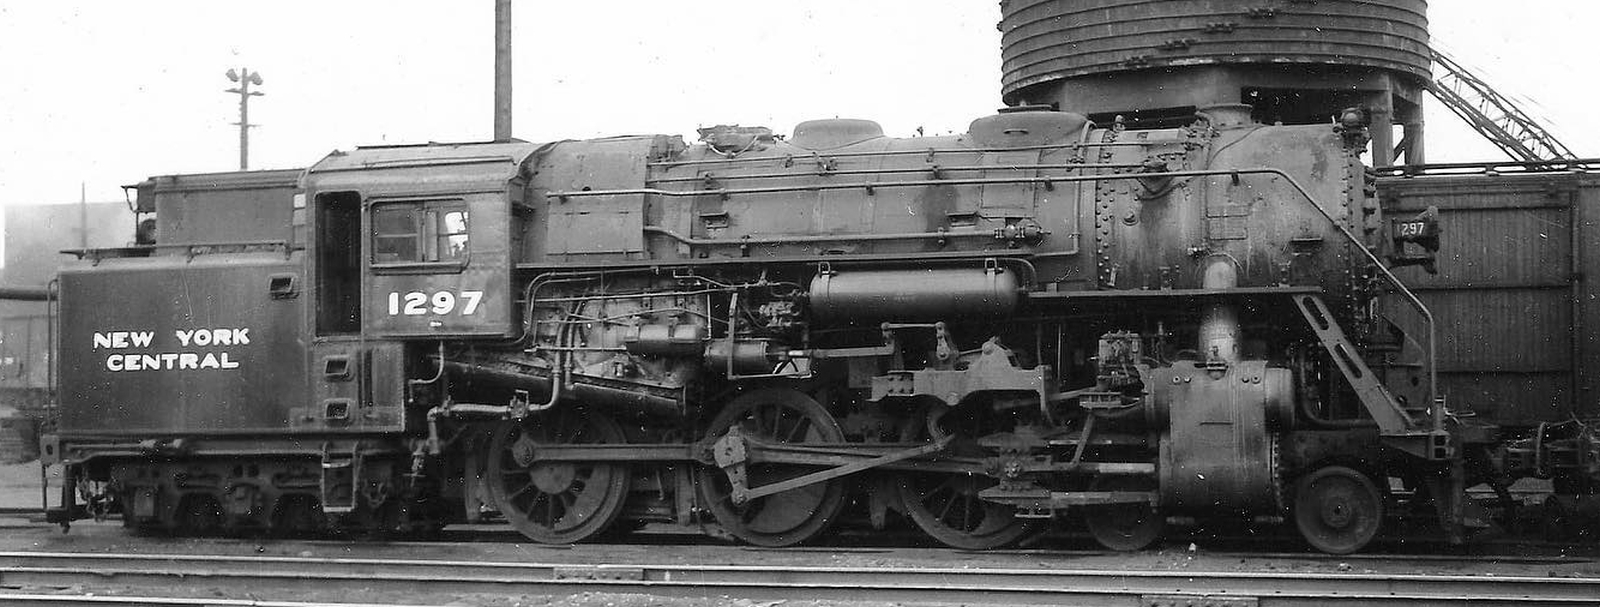 No. 1297 in August 1951 in Syracuse, New York